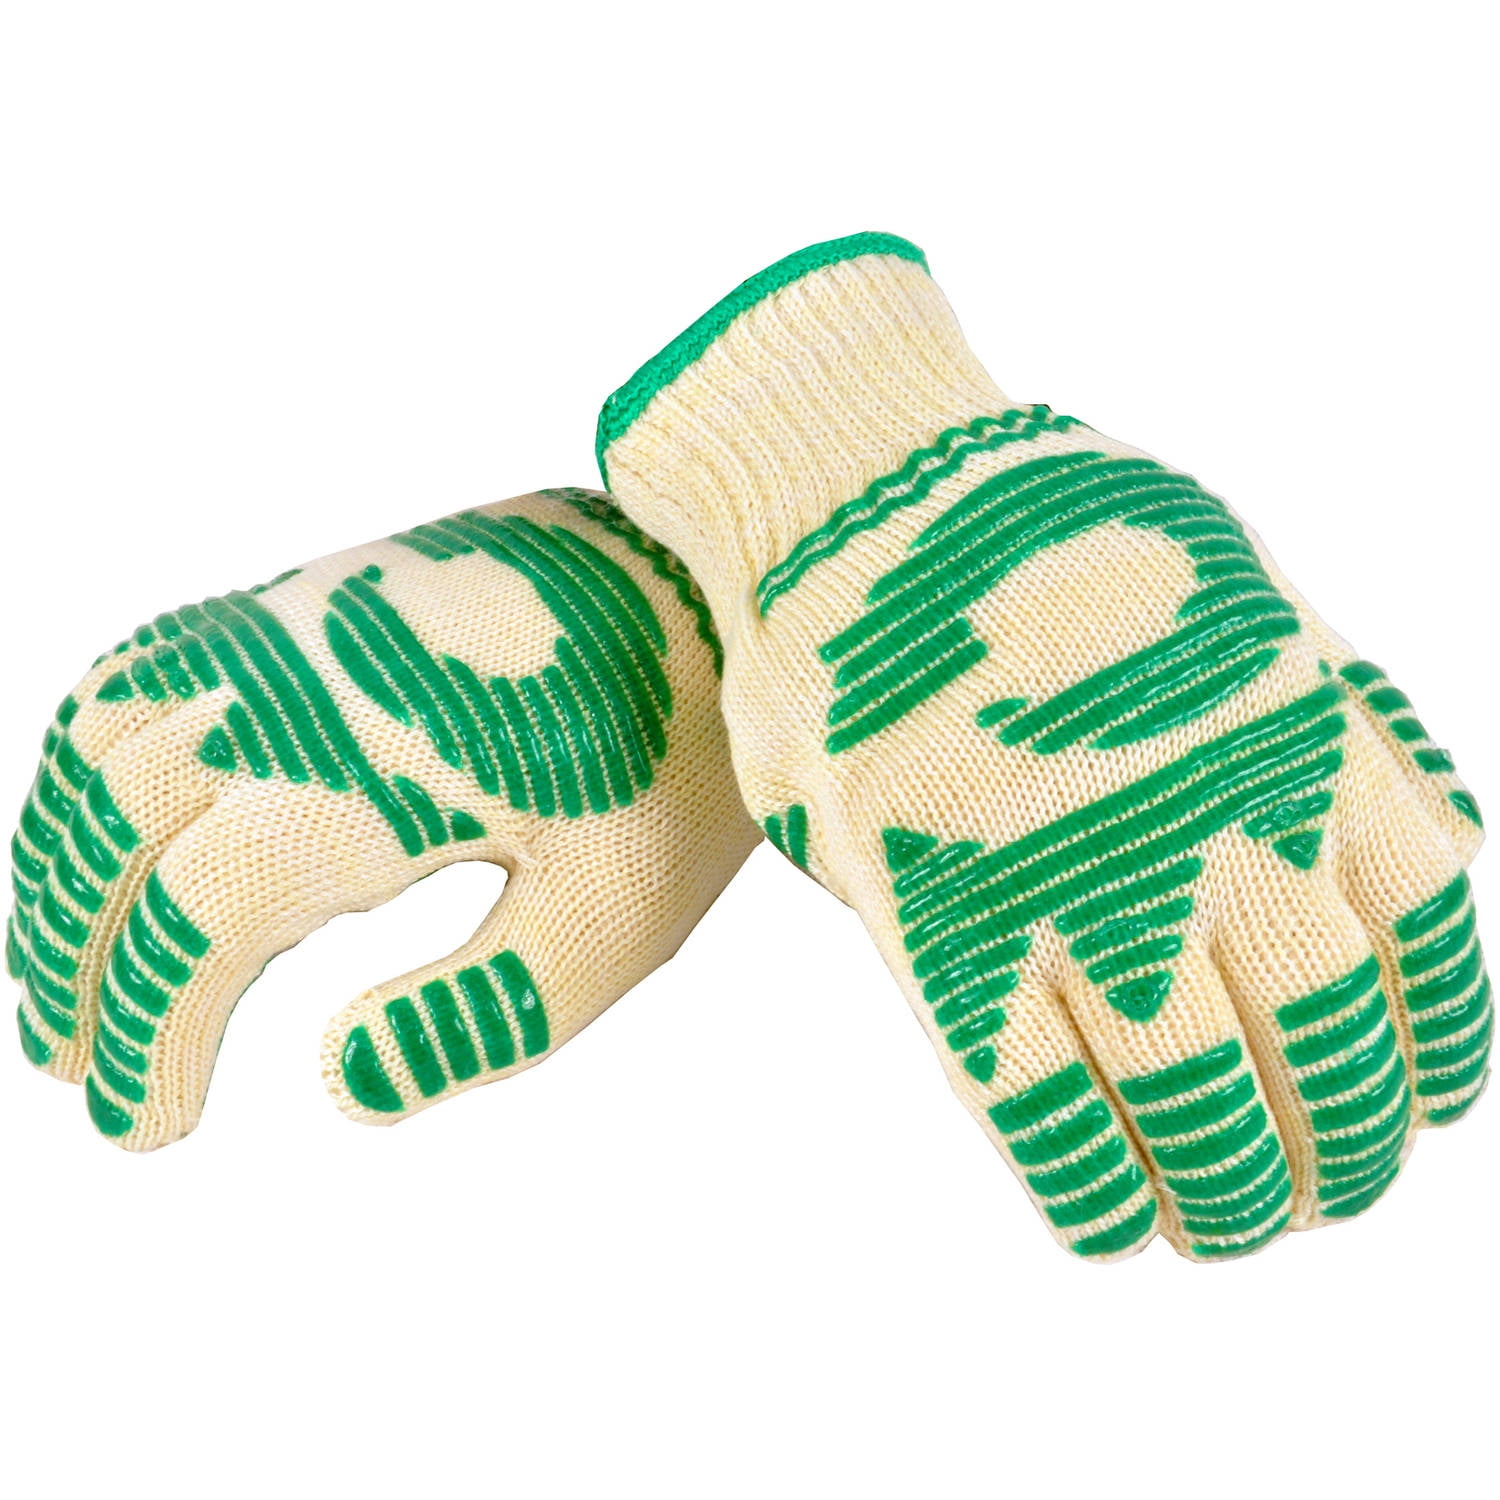 Laffair Oven Mitts - Green - Potholders for Home Cooking, Non-Slip Silicon Grip Oven Glove, Heat Resistant Gloves & Modern Oven Gloves – Maximum